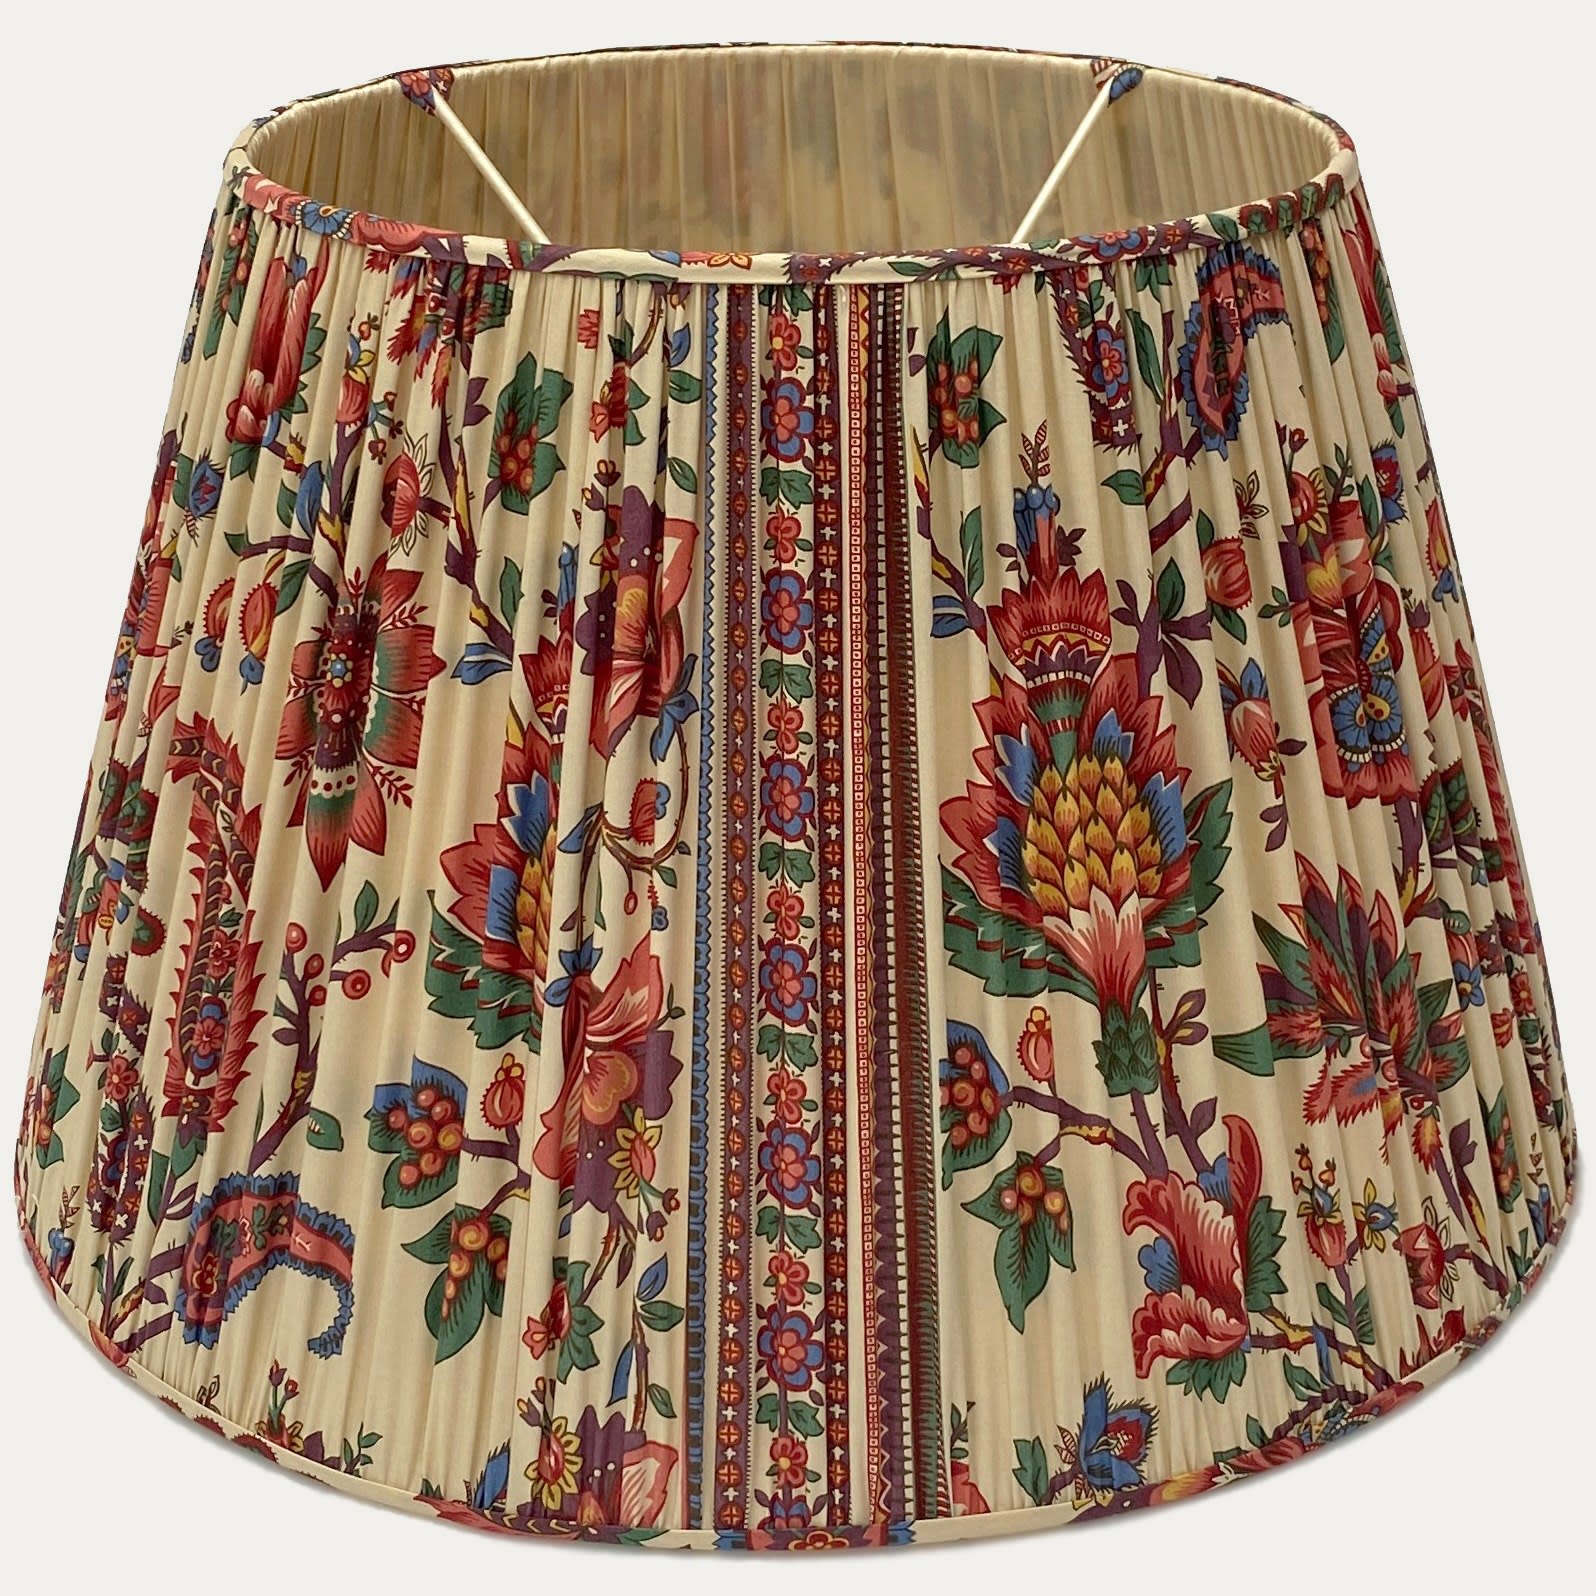 10 Silk Sari Lampshade - Maroon and Lichen Green Floral on Opal